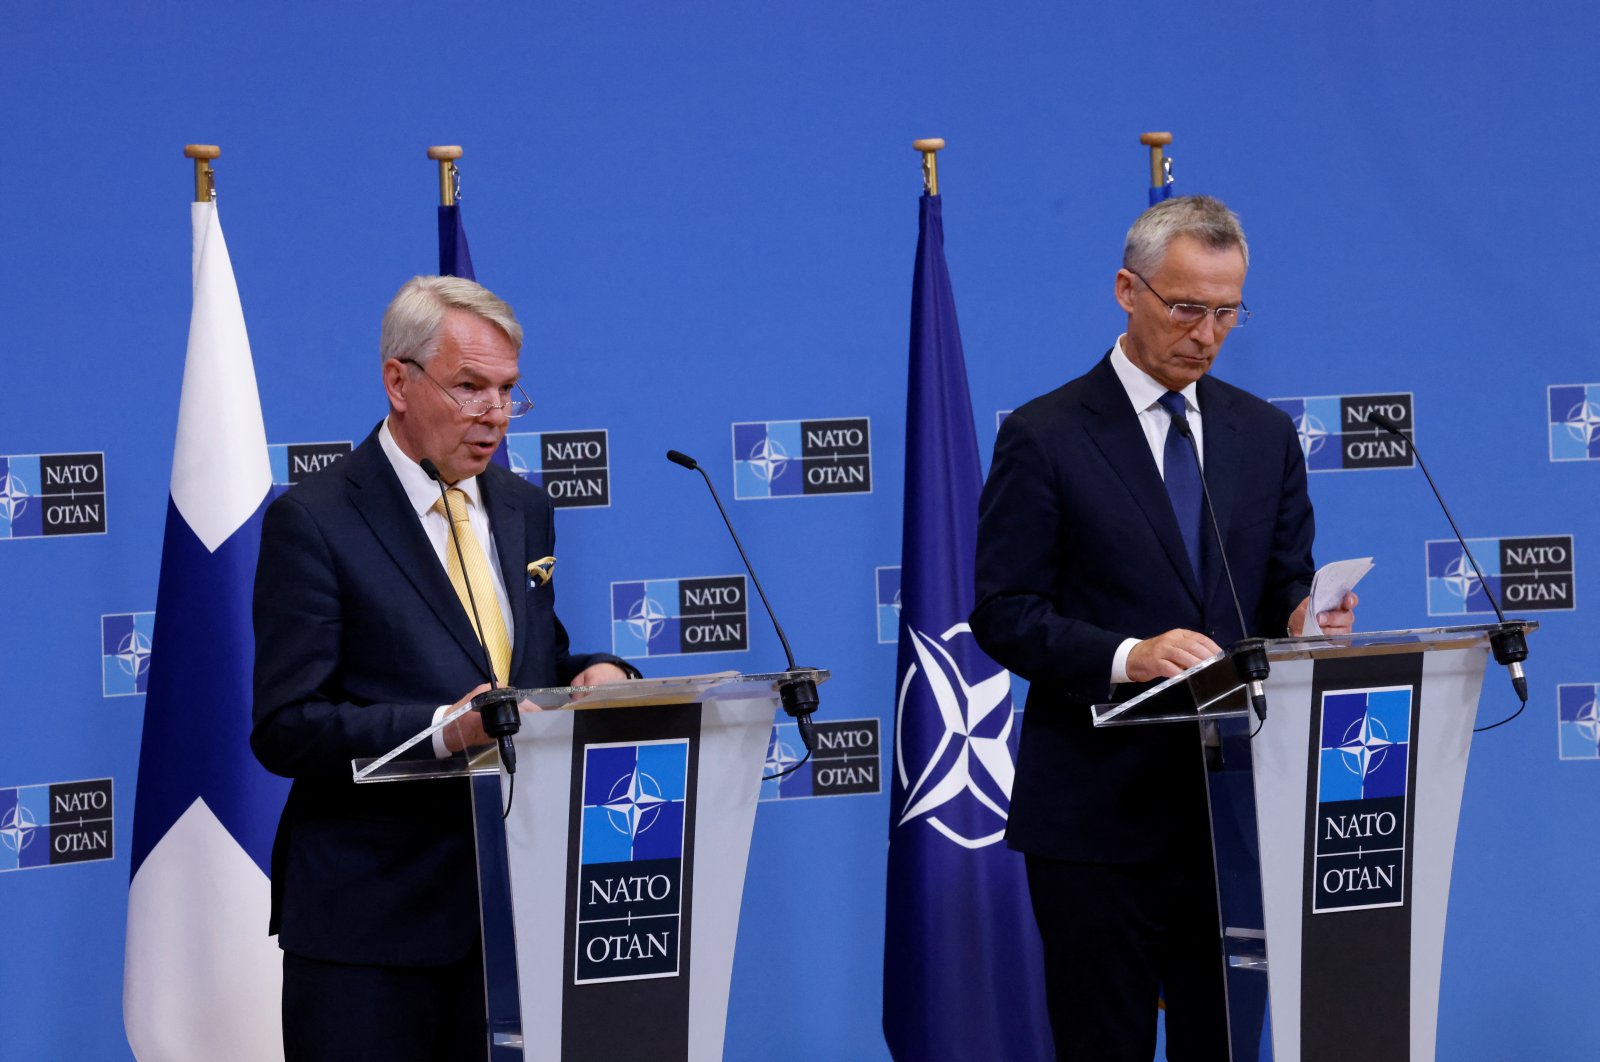 Finland&#039;s Foreign Minister Pekka Haavisto (L) and Sweden&#039;s Foreign Minister Ann Linde (not pictured) attend a news conference with NATO Secretary General Jens Stoltenberg (R), after signing their countries&#039; accession protocols at the alliance&#039;s headquarters in Brussels, Belgium July 5, 2022. (Reuters Photo)